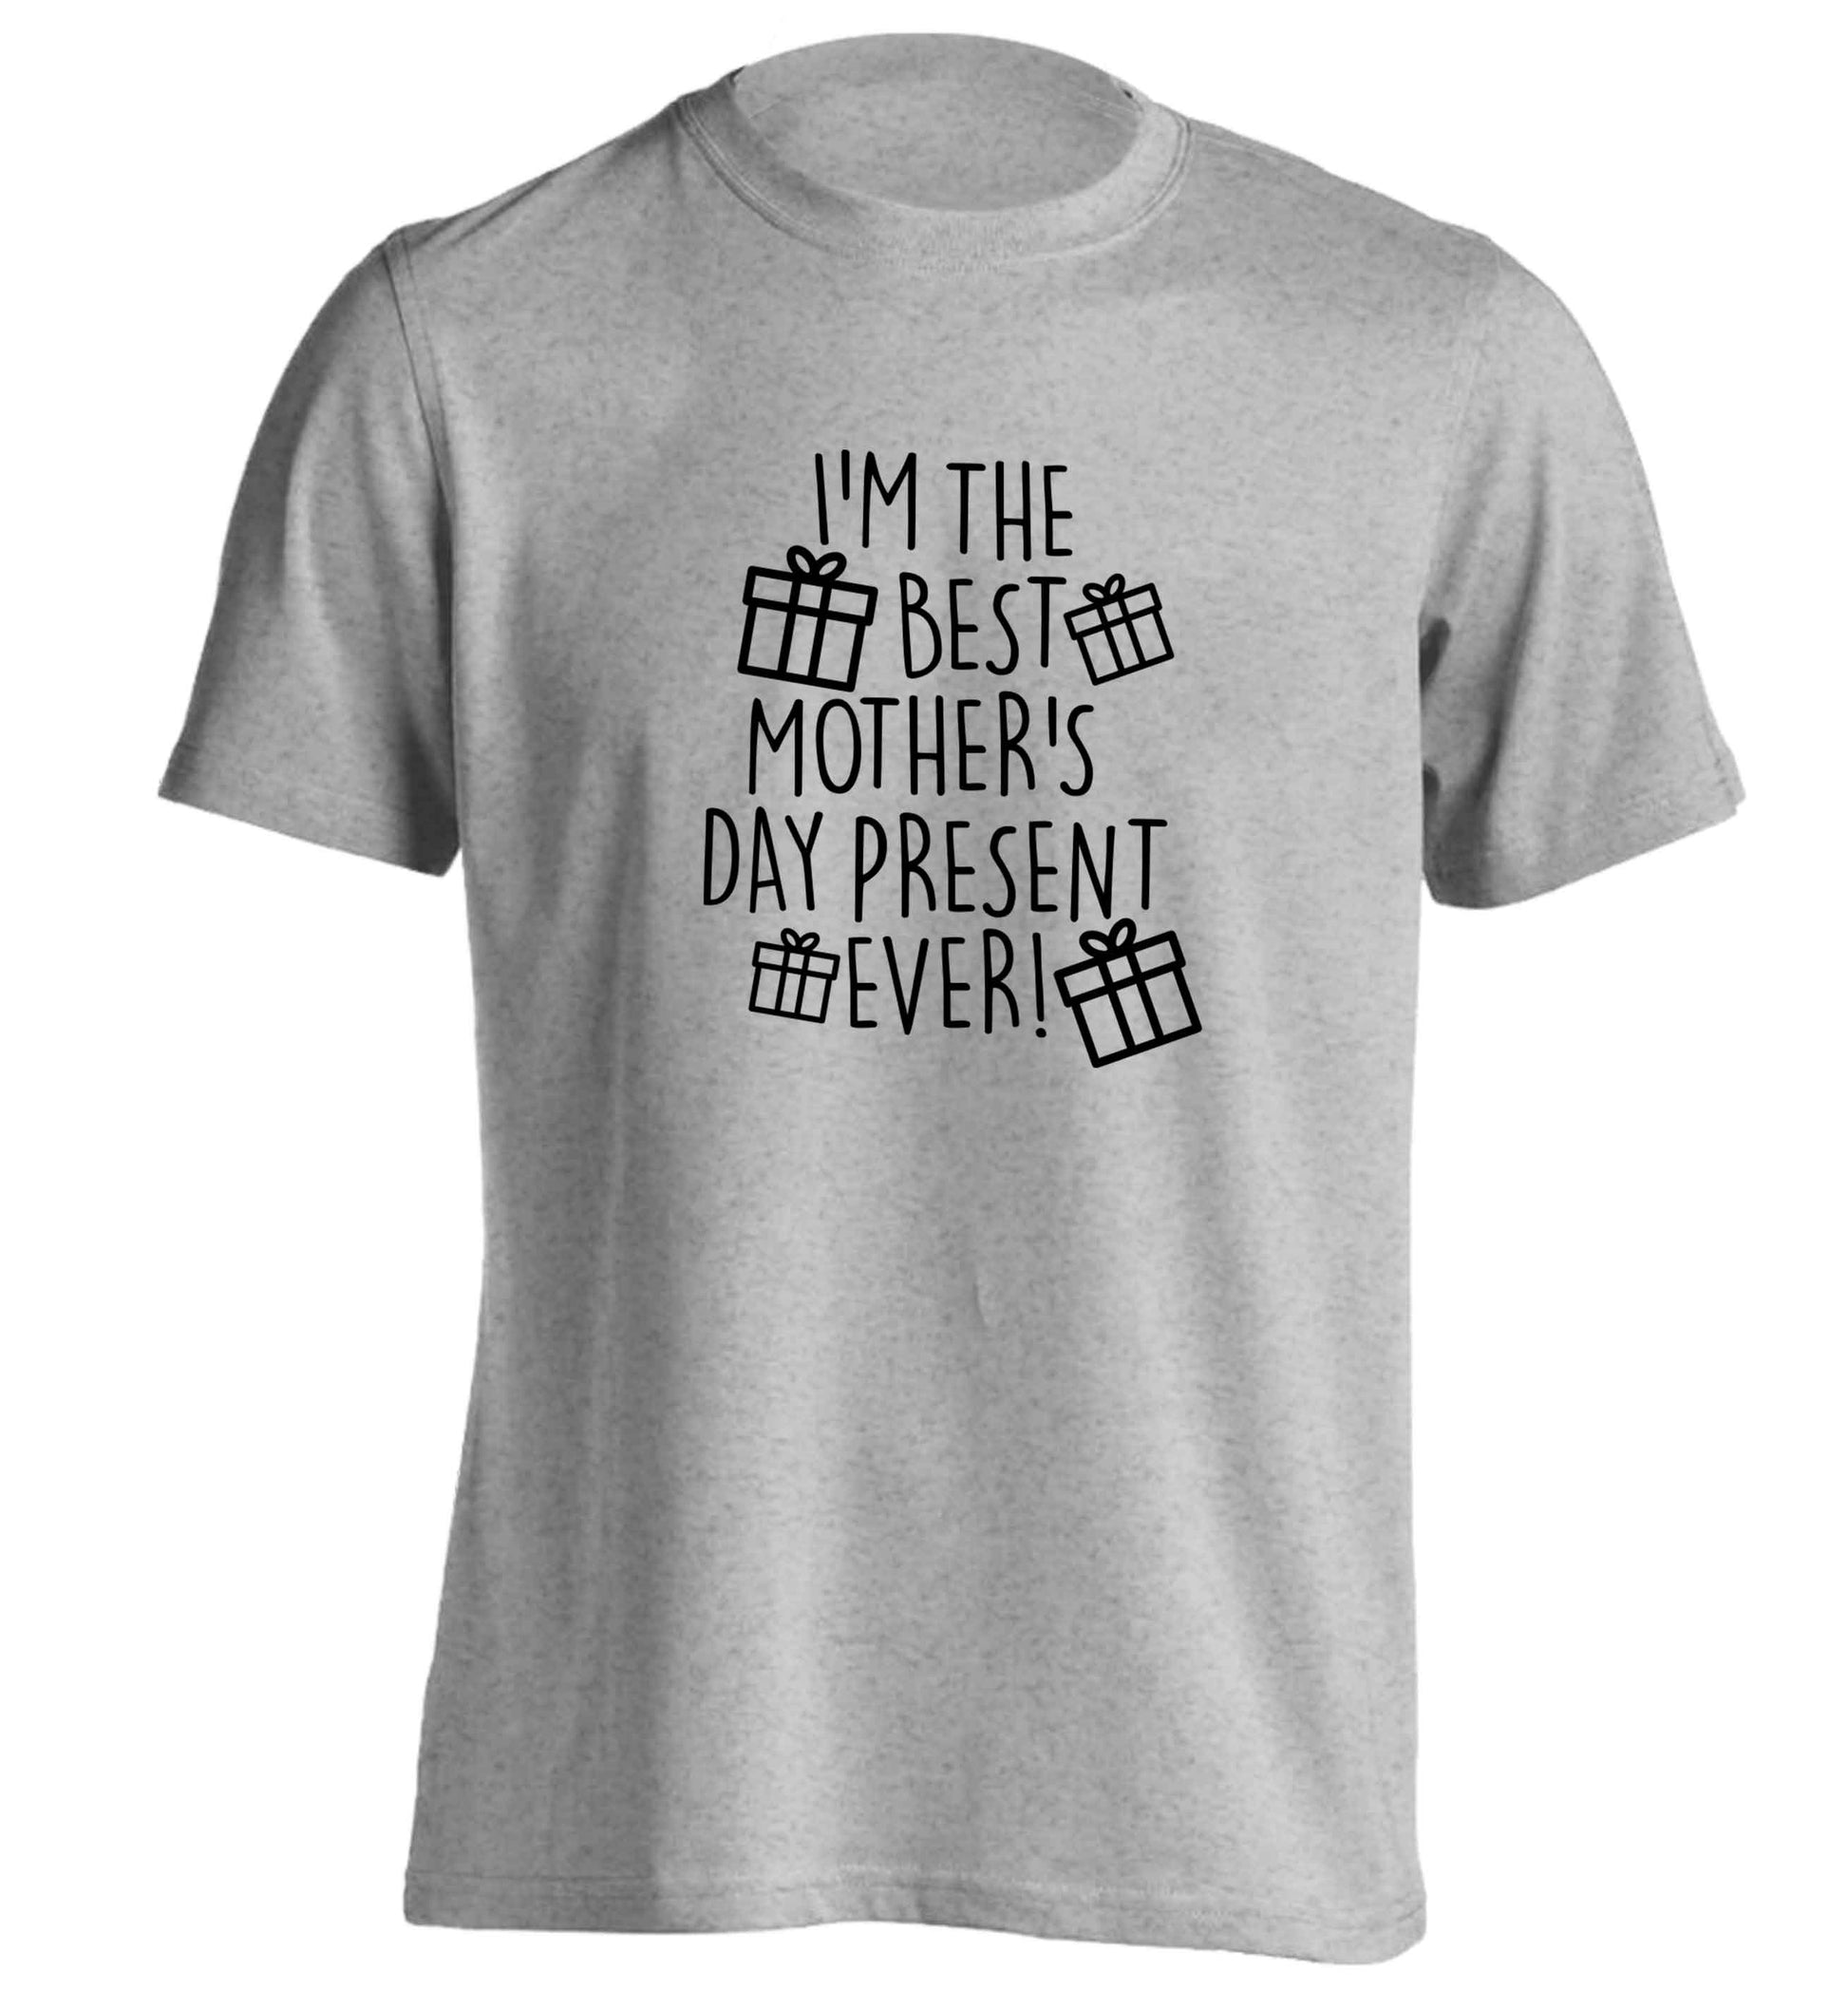 I'm the best mother's day present ever! adults unisex grey Tshirt 2XL